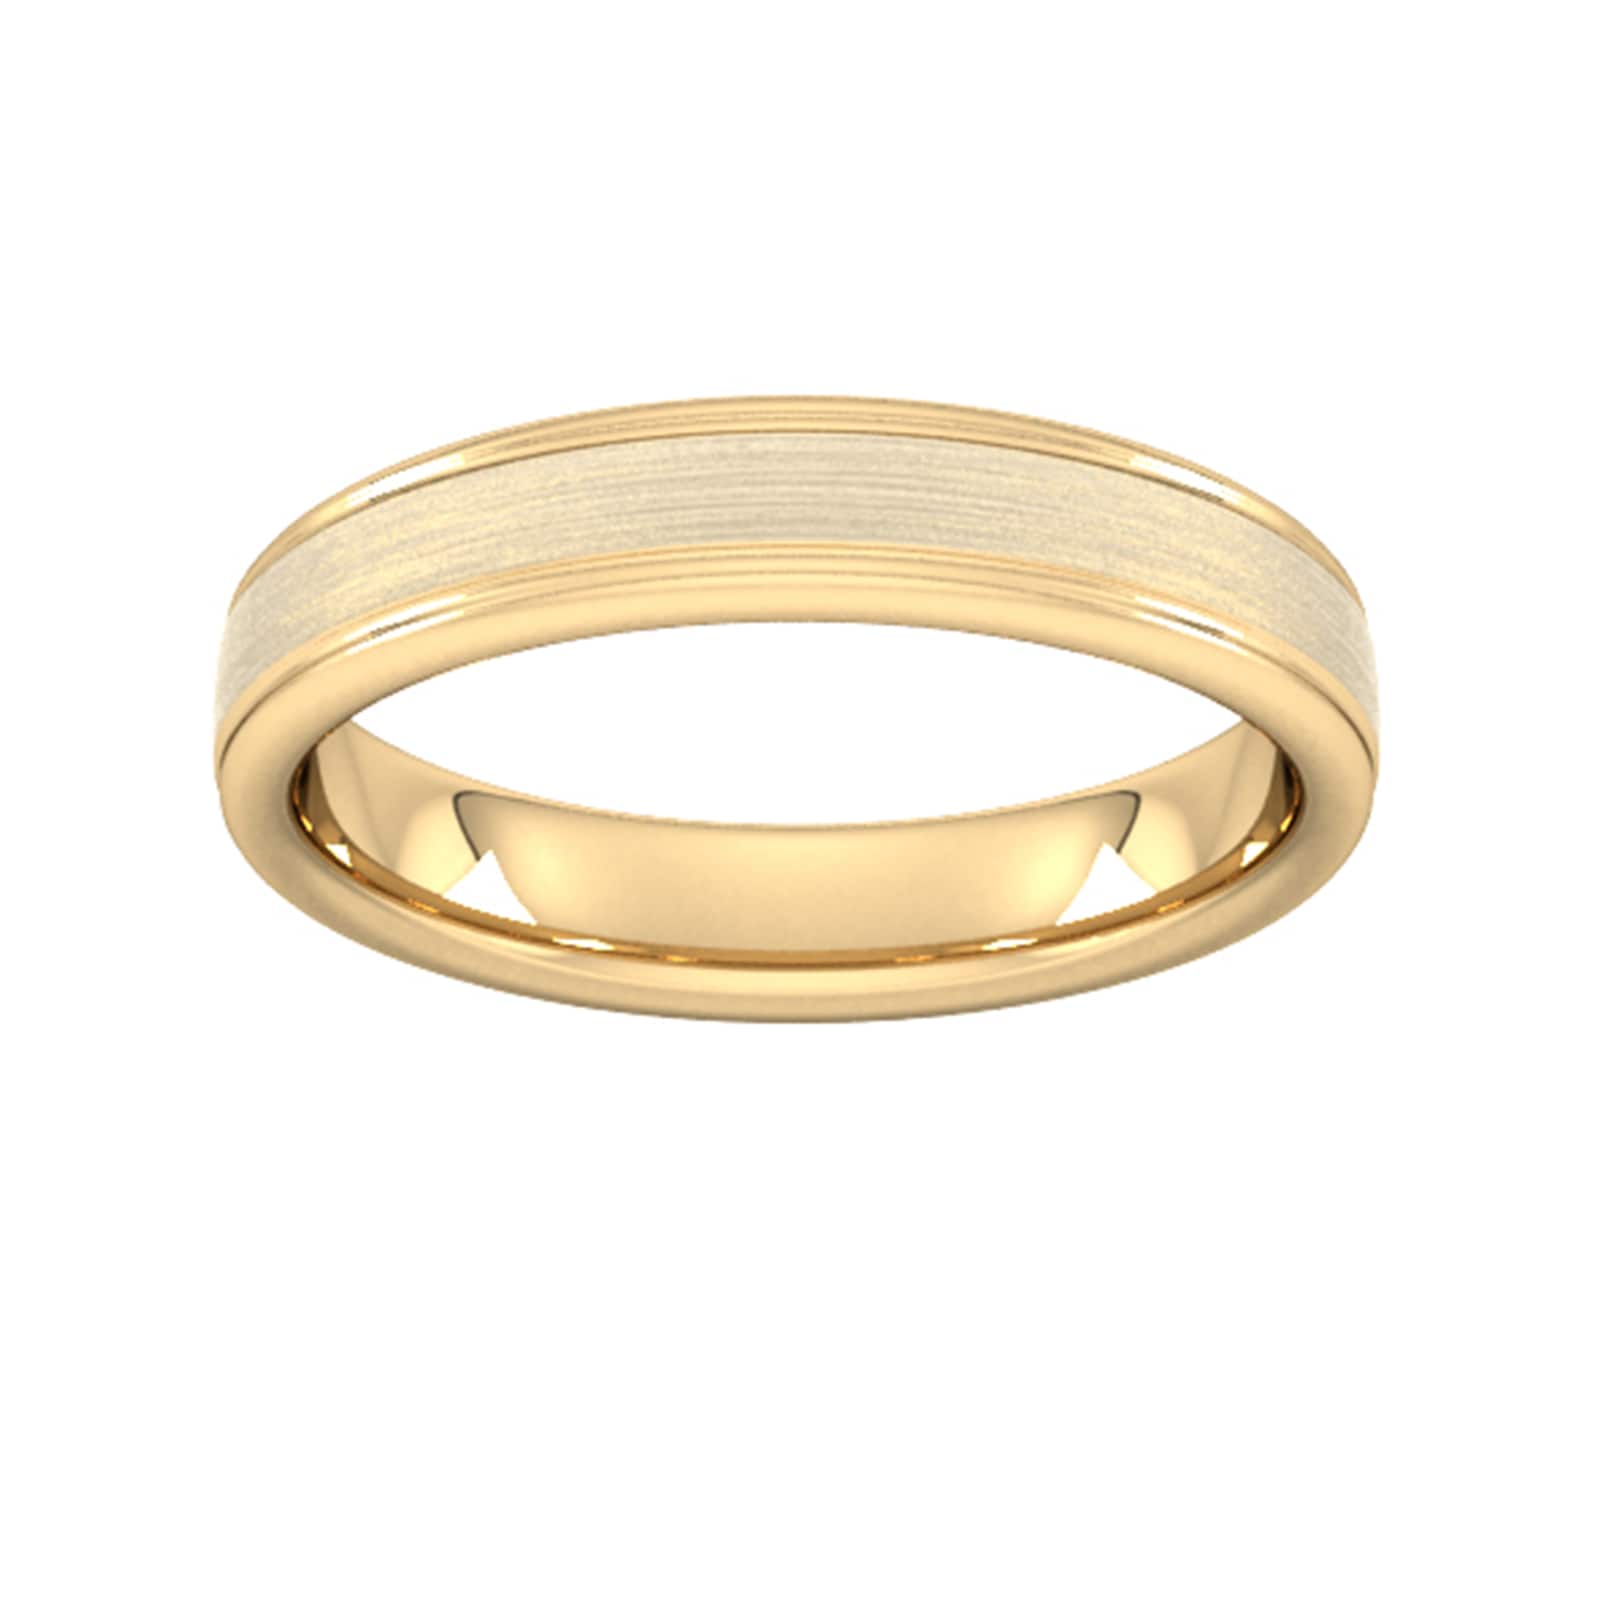 4mm Slight Court Heavy Matt Centre With Grooves Wedding Ring In 9 Carat Yellow Gold - Ring Size Y